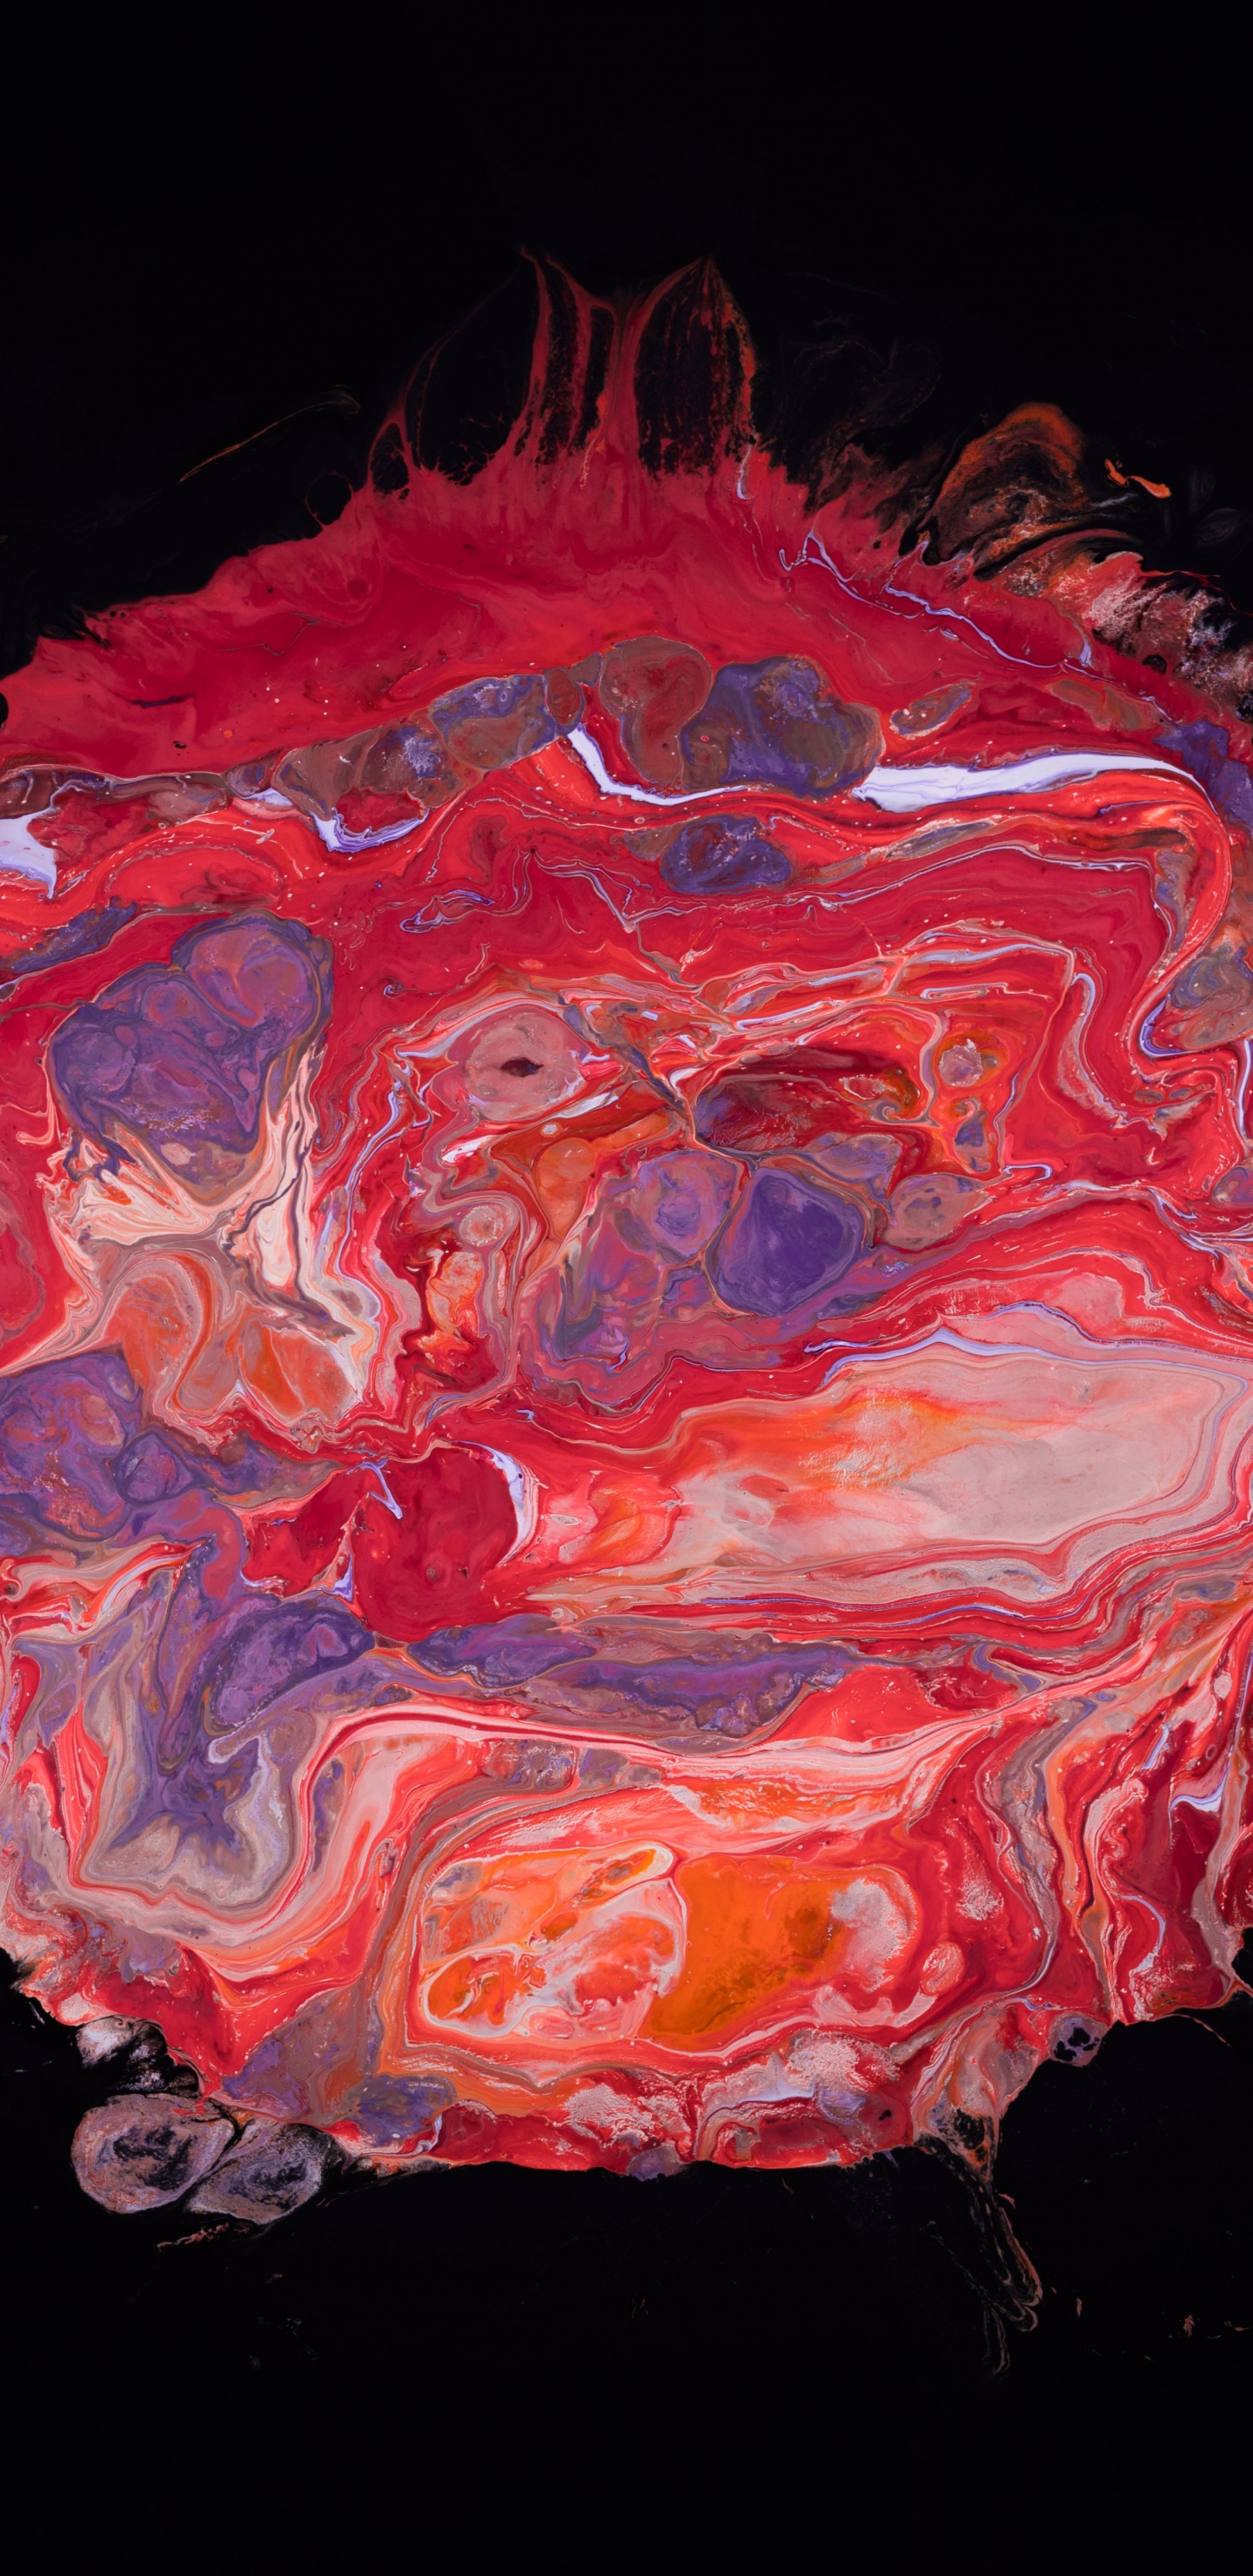 Red and White Abstract Painting. Wallpaper in 1440x2960 Resolution